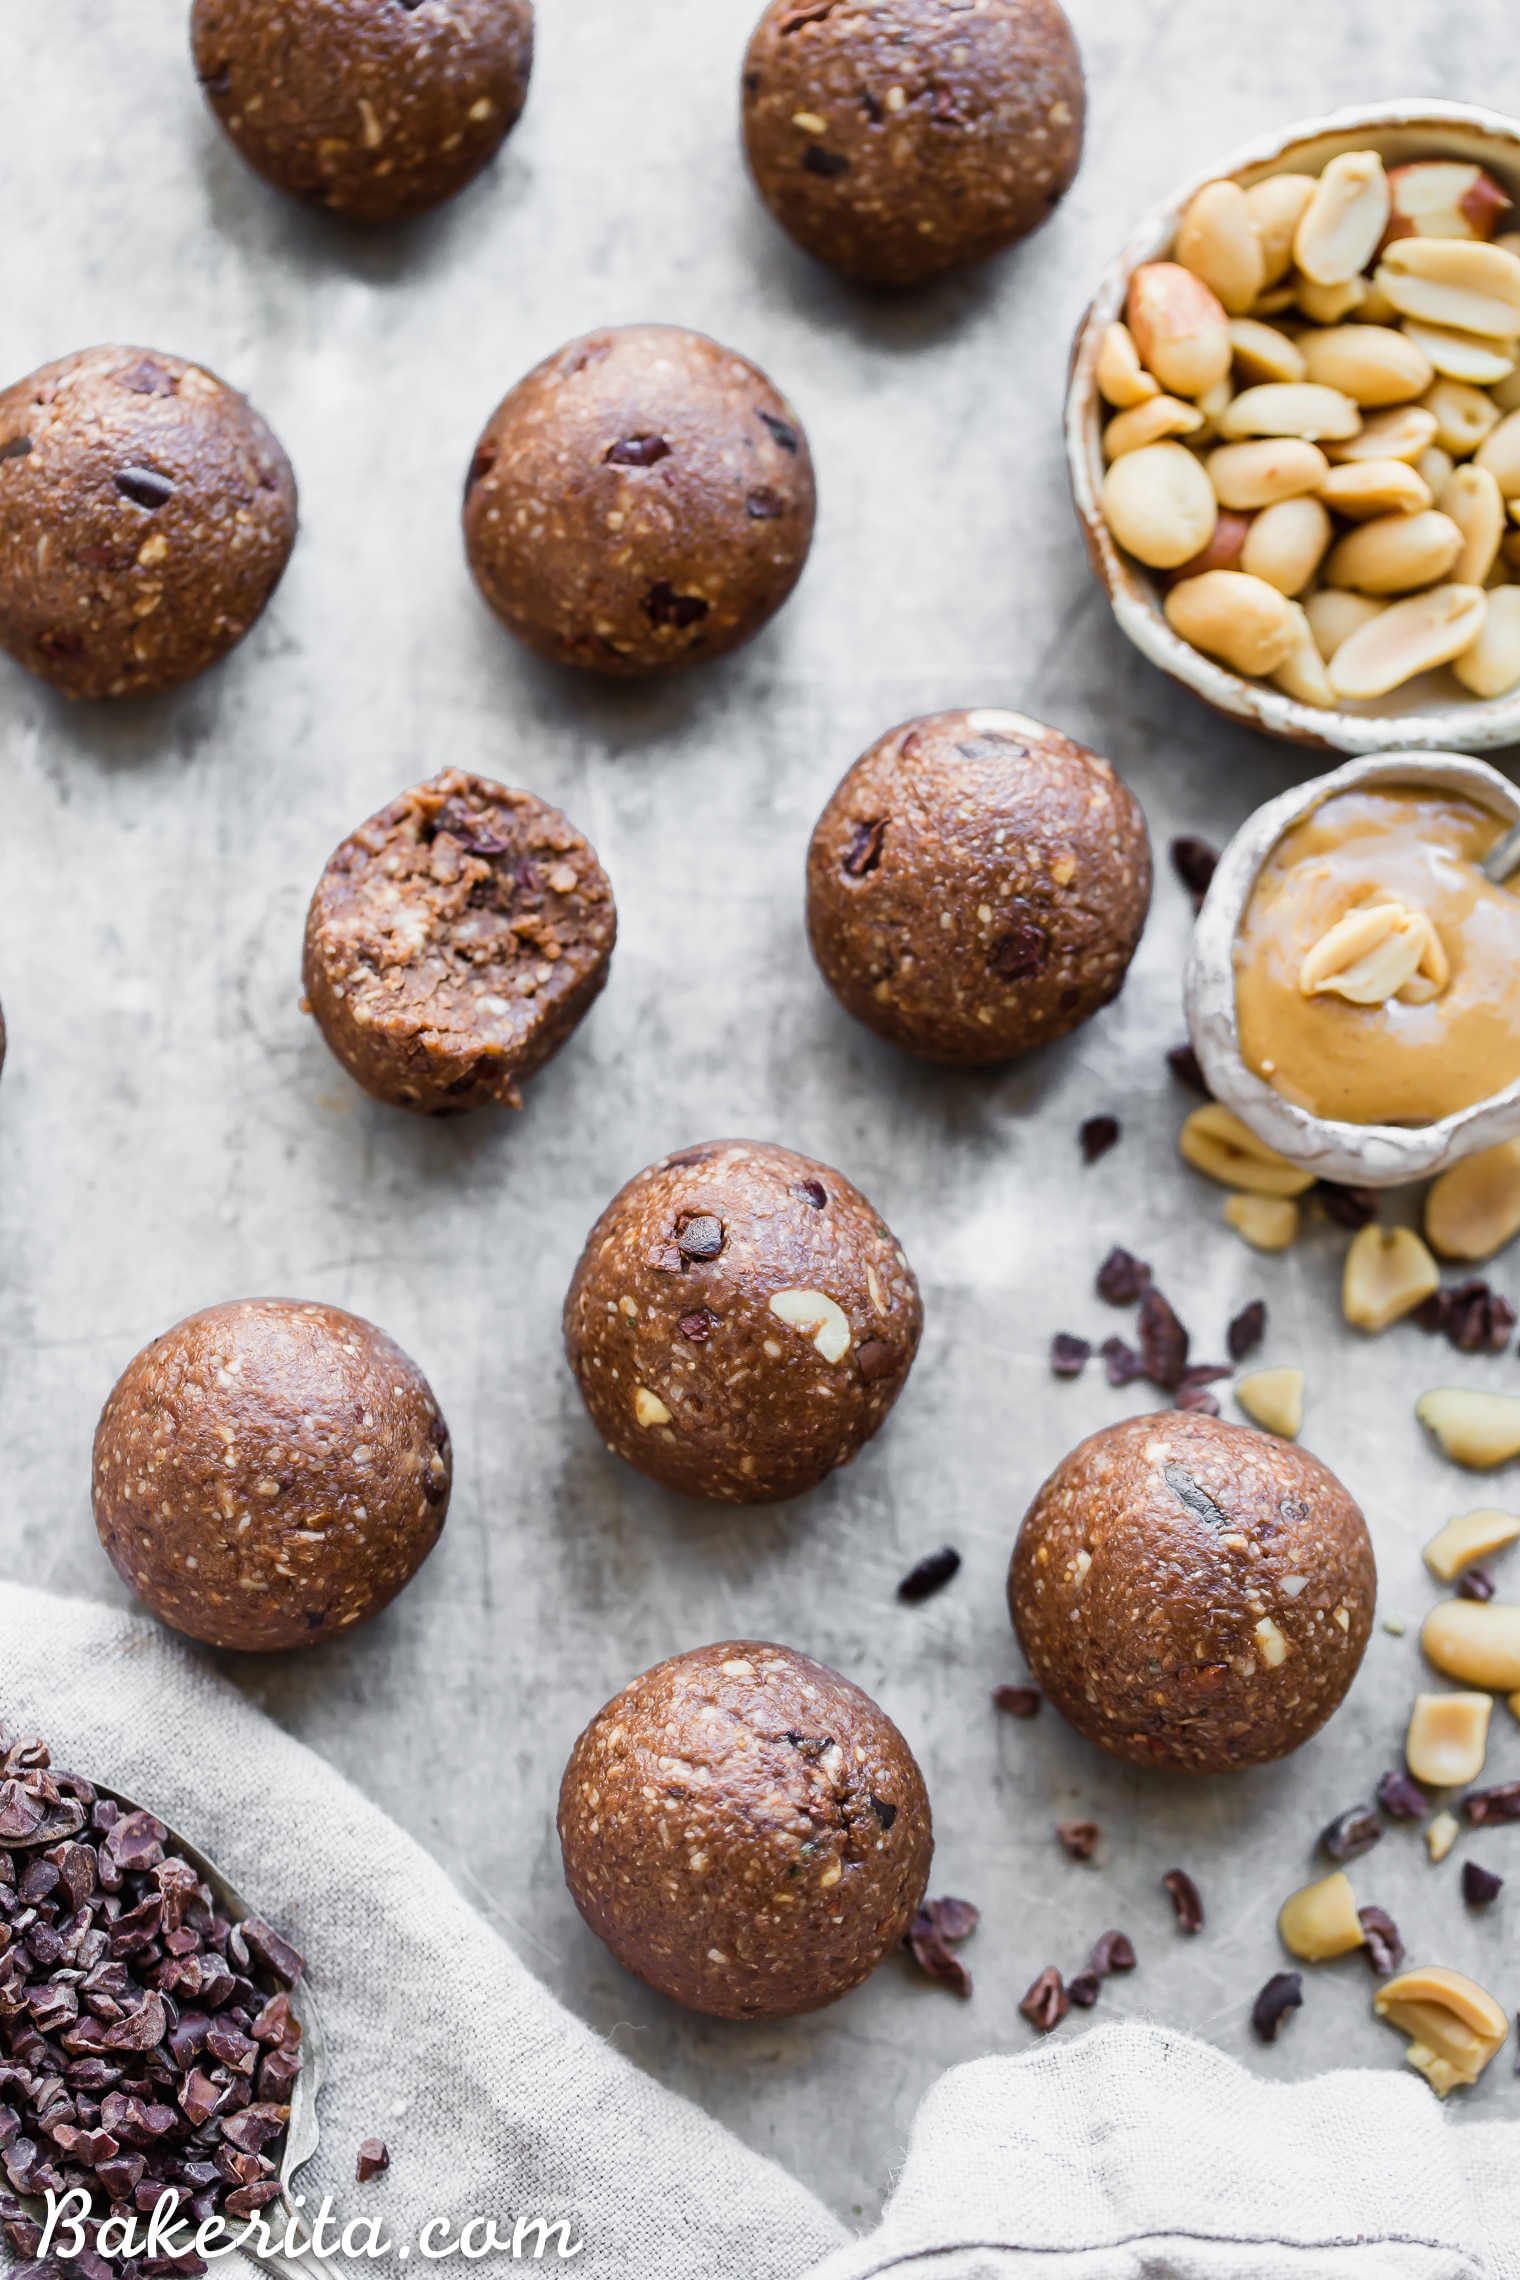 These Cacao Peanut Butter Fat Bombs taste like an indulgent treat, but they're actually super filling and fueling! Made with peanuts, peanut butter, and cacao nibs, these fat bombs are a gluten-free, keto, vegan, and low-sugar treat that makes the perfect snack. 